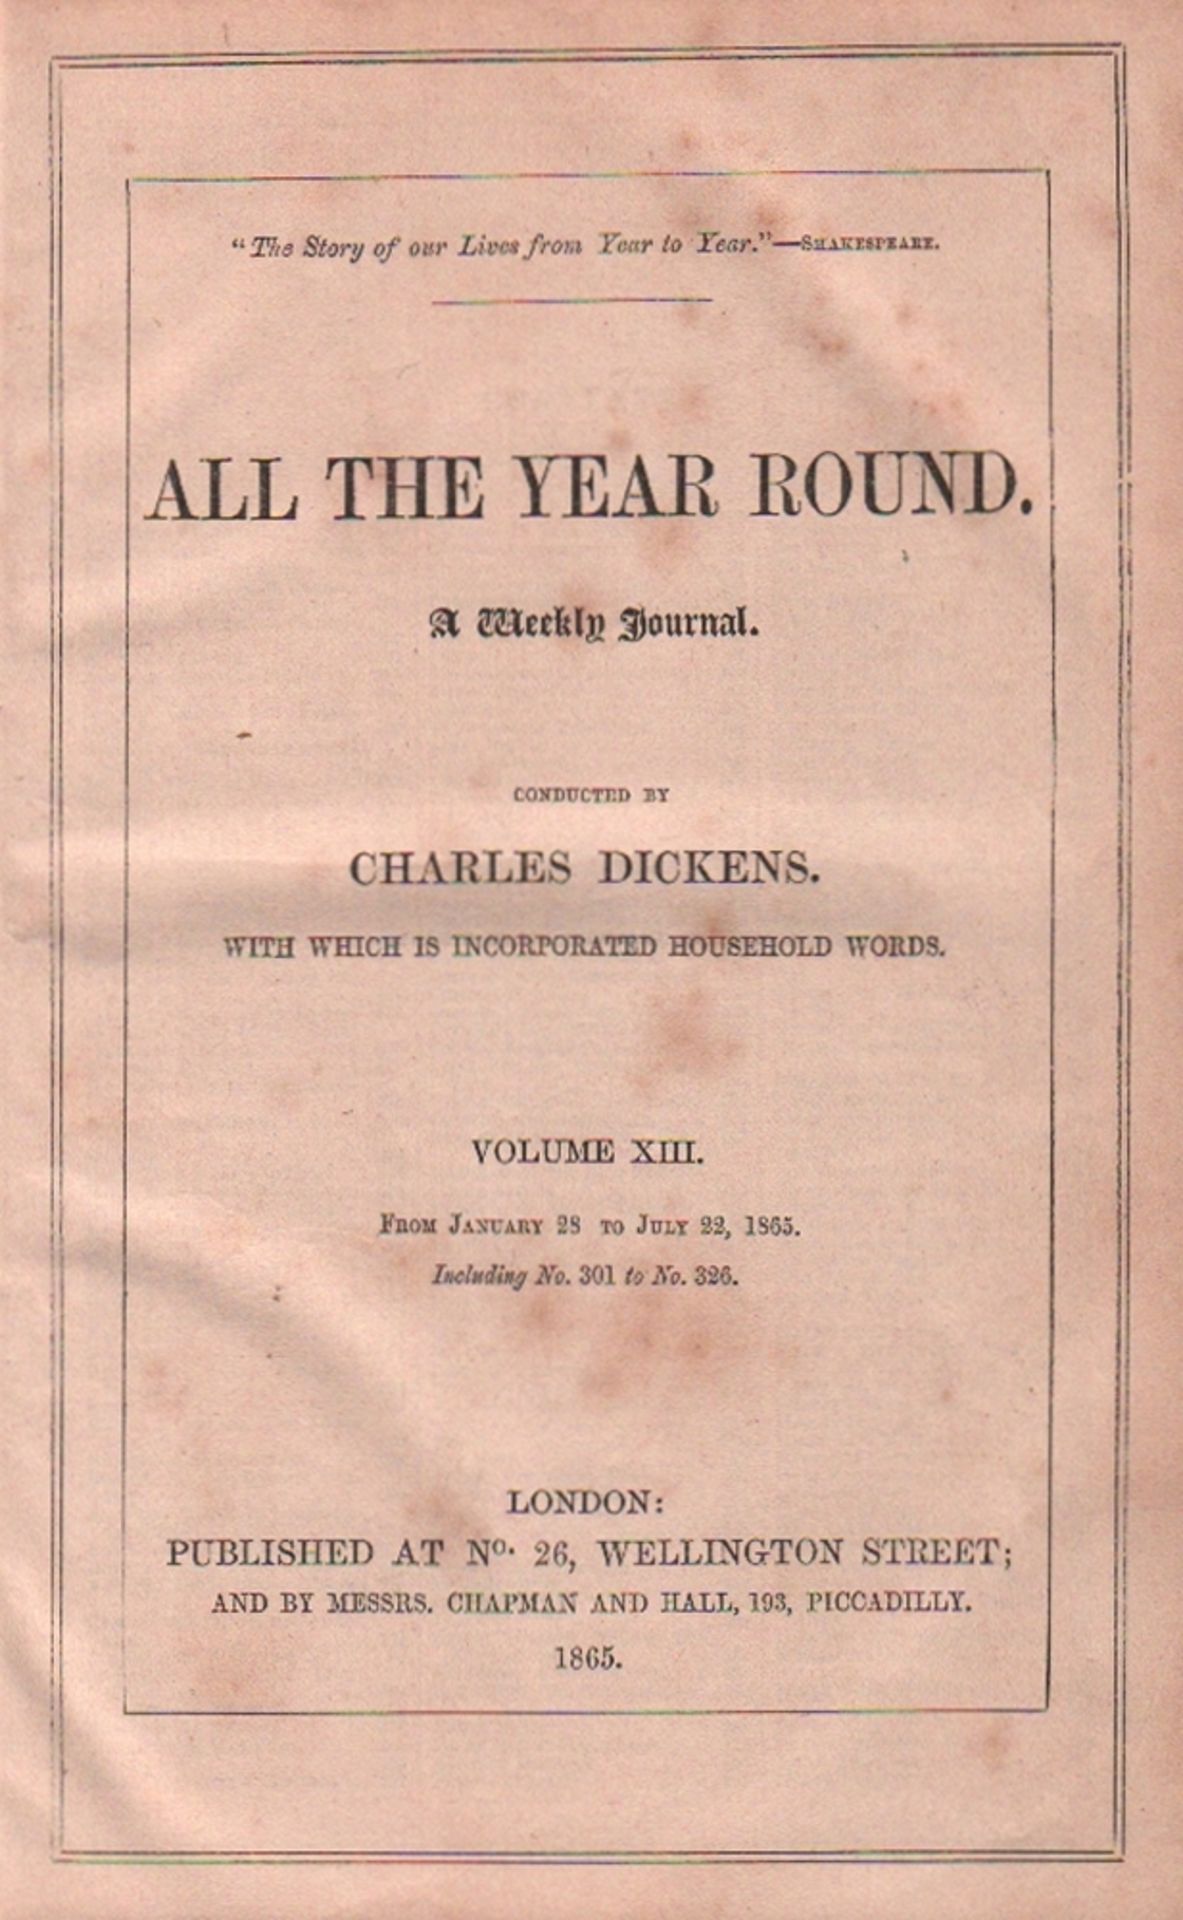 All the Year round. A Weekly Journal. Conducted by Charles Dickens. Volume XIII, from January 28